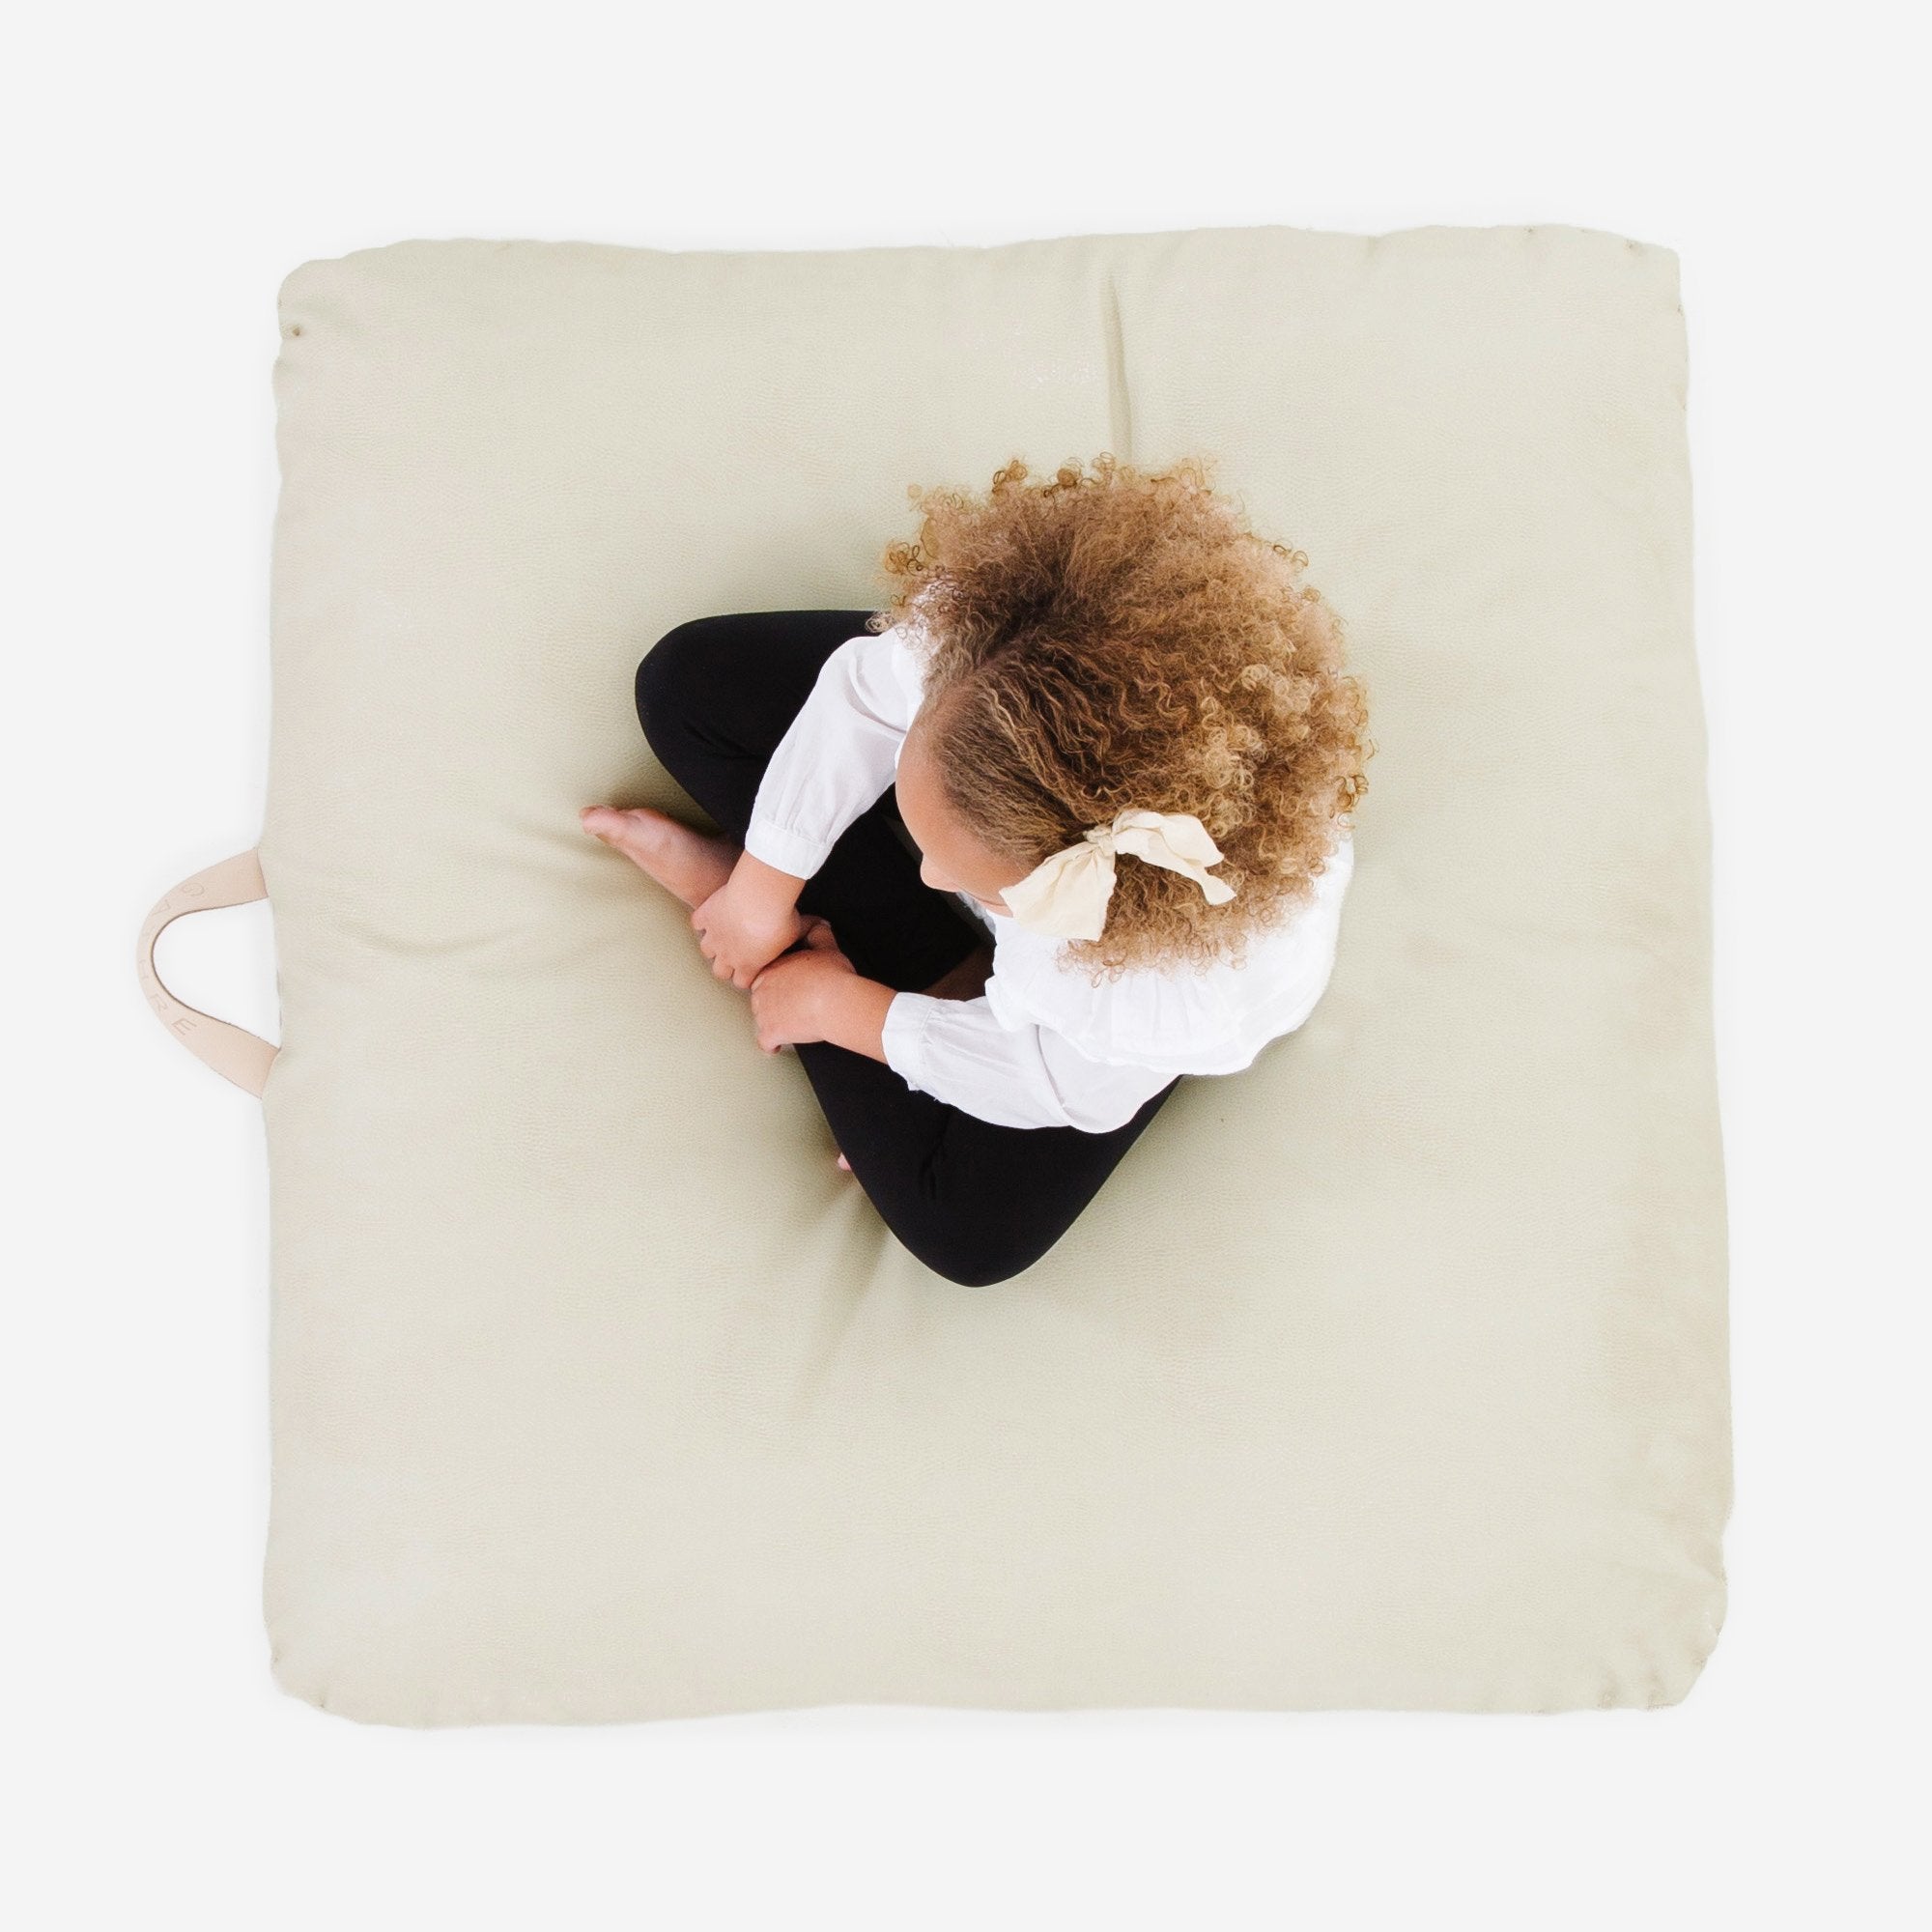 Blanc (on sale) / Square@Overhead of kid sitting on the Blanc Square Floor Cushion